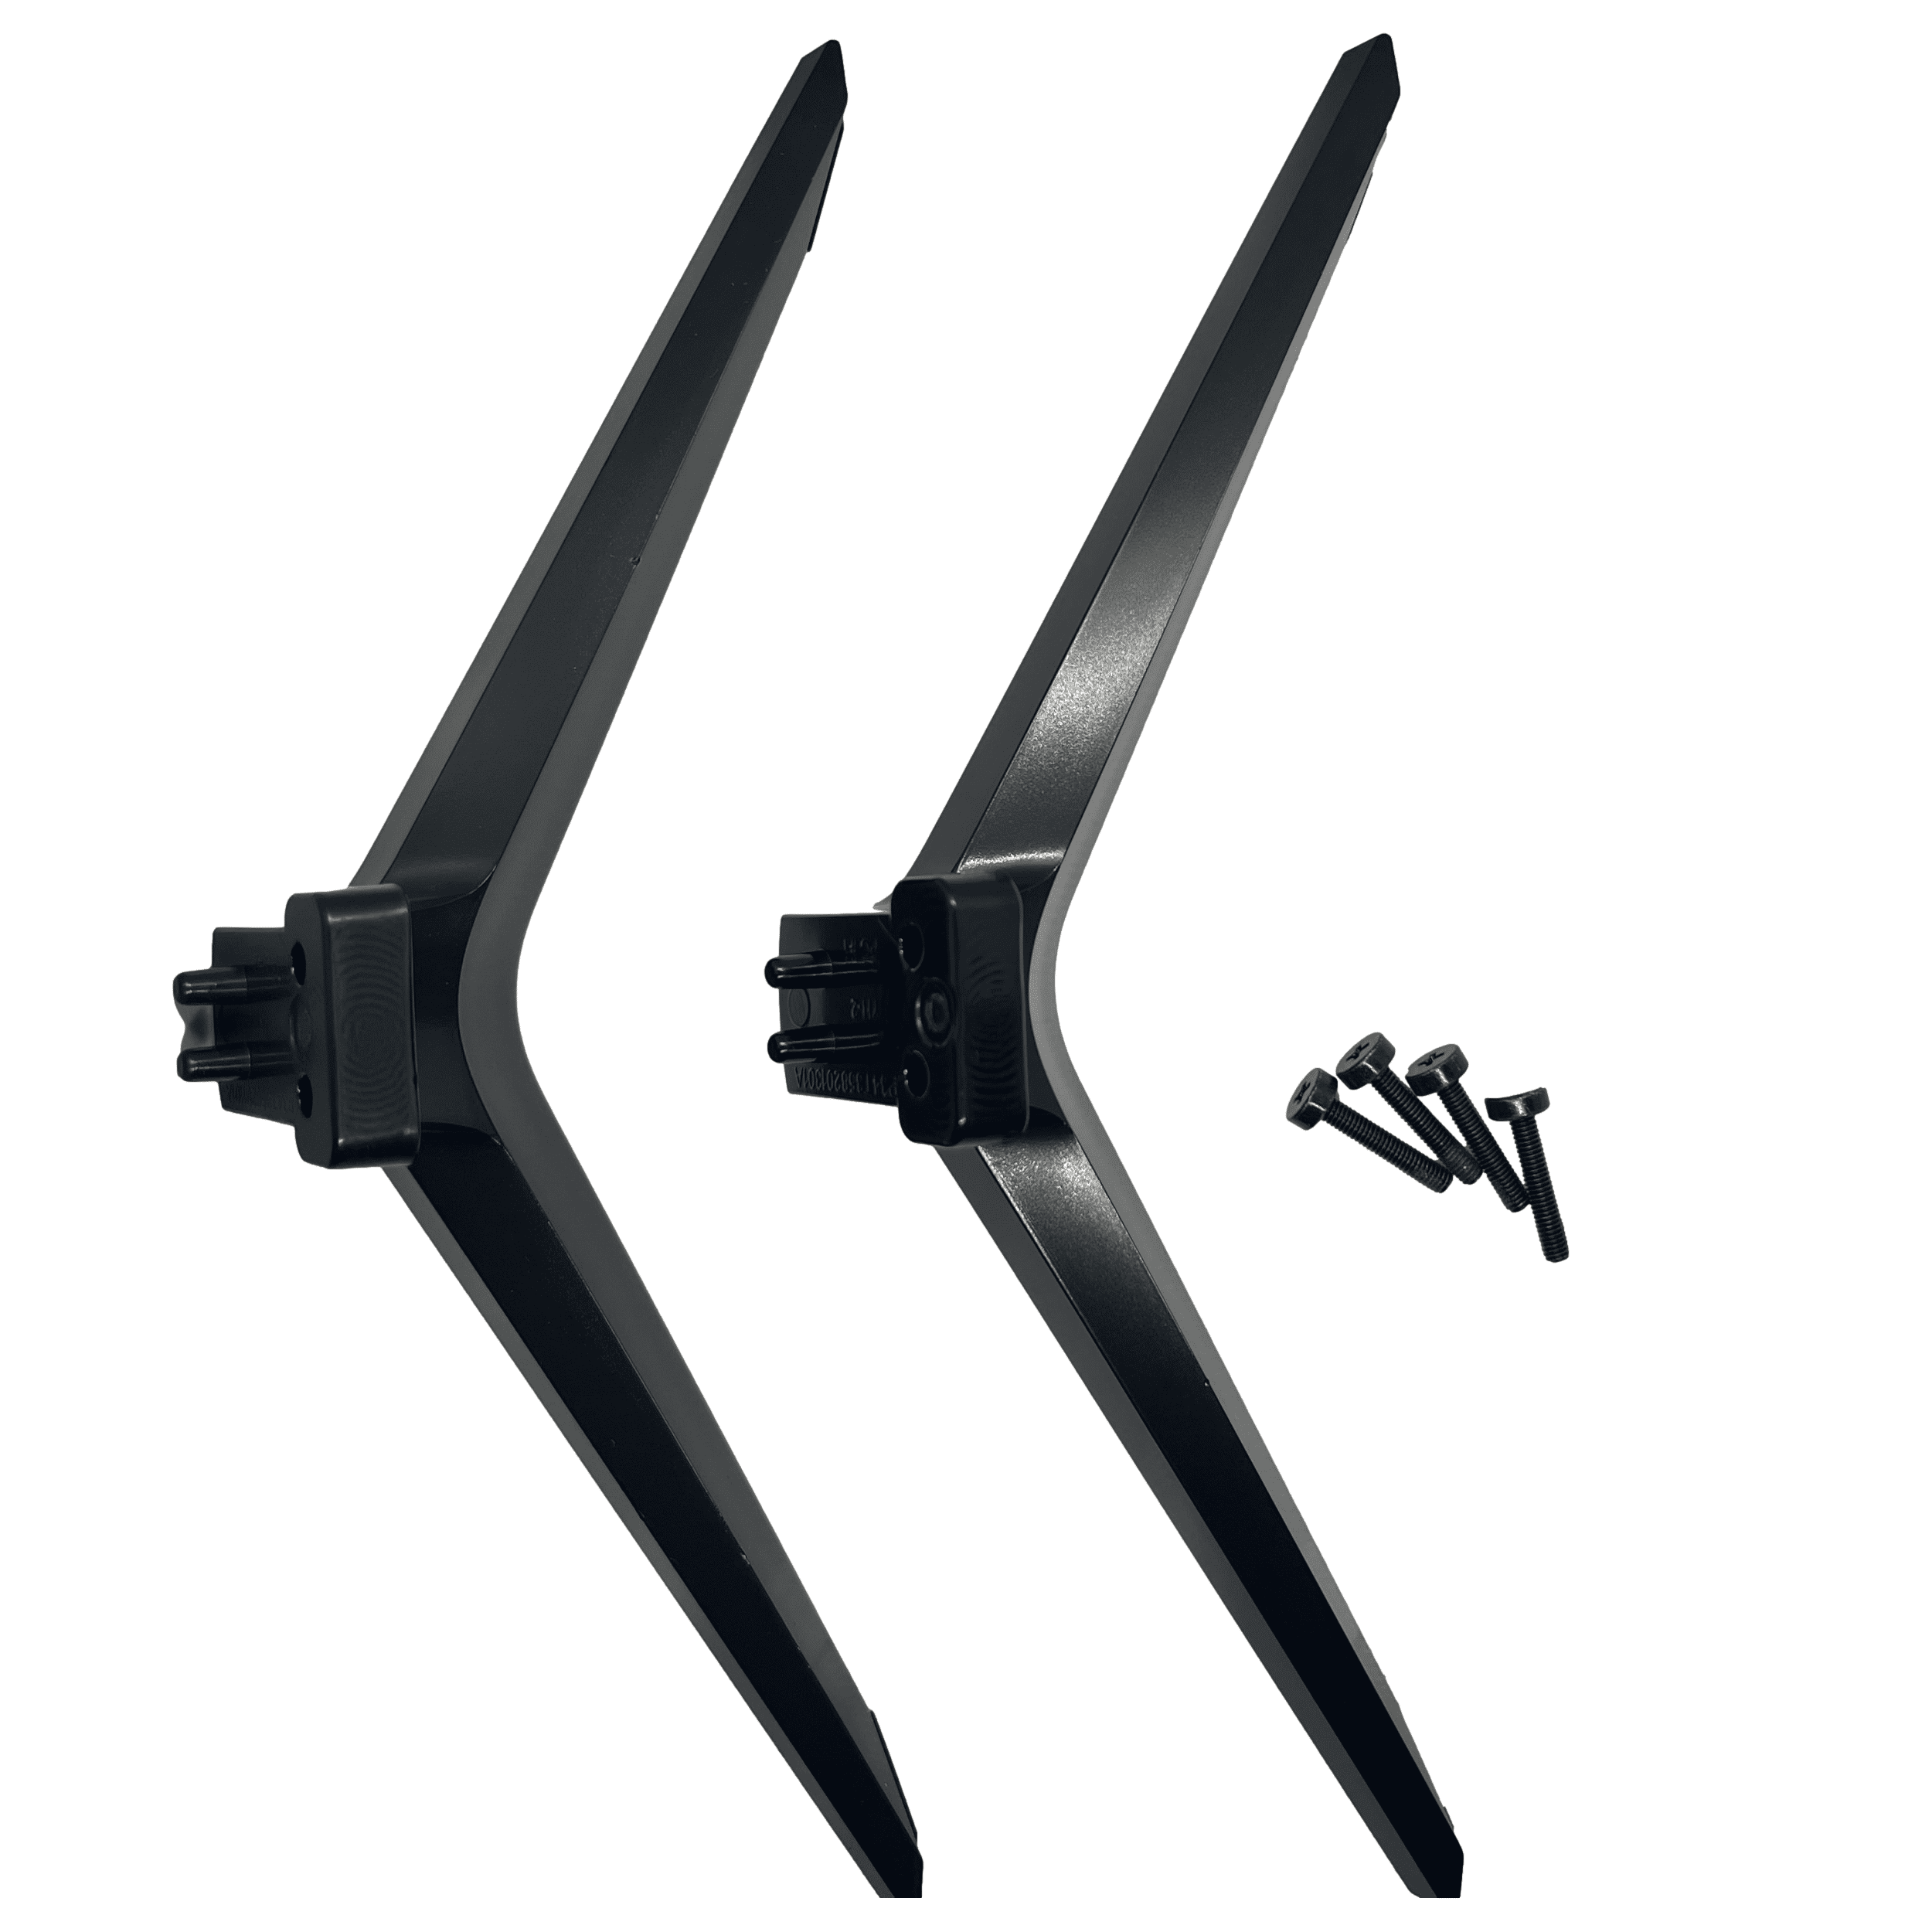 Xtrasaver TV Base Stand Legs OEM Replacement for Vizio V505-G9/D50X-G9 Complete with Screws 